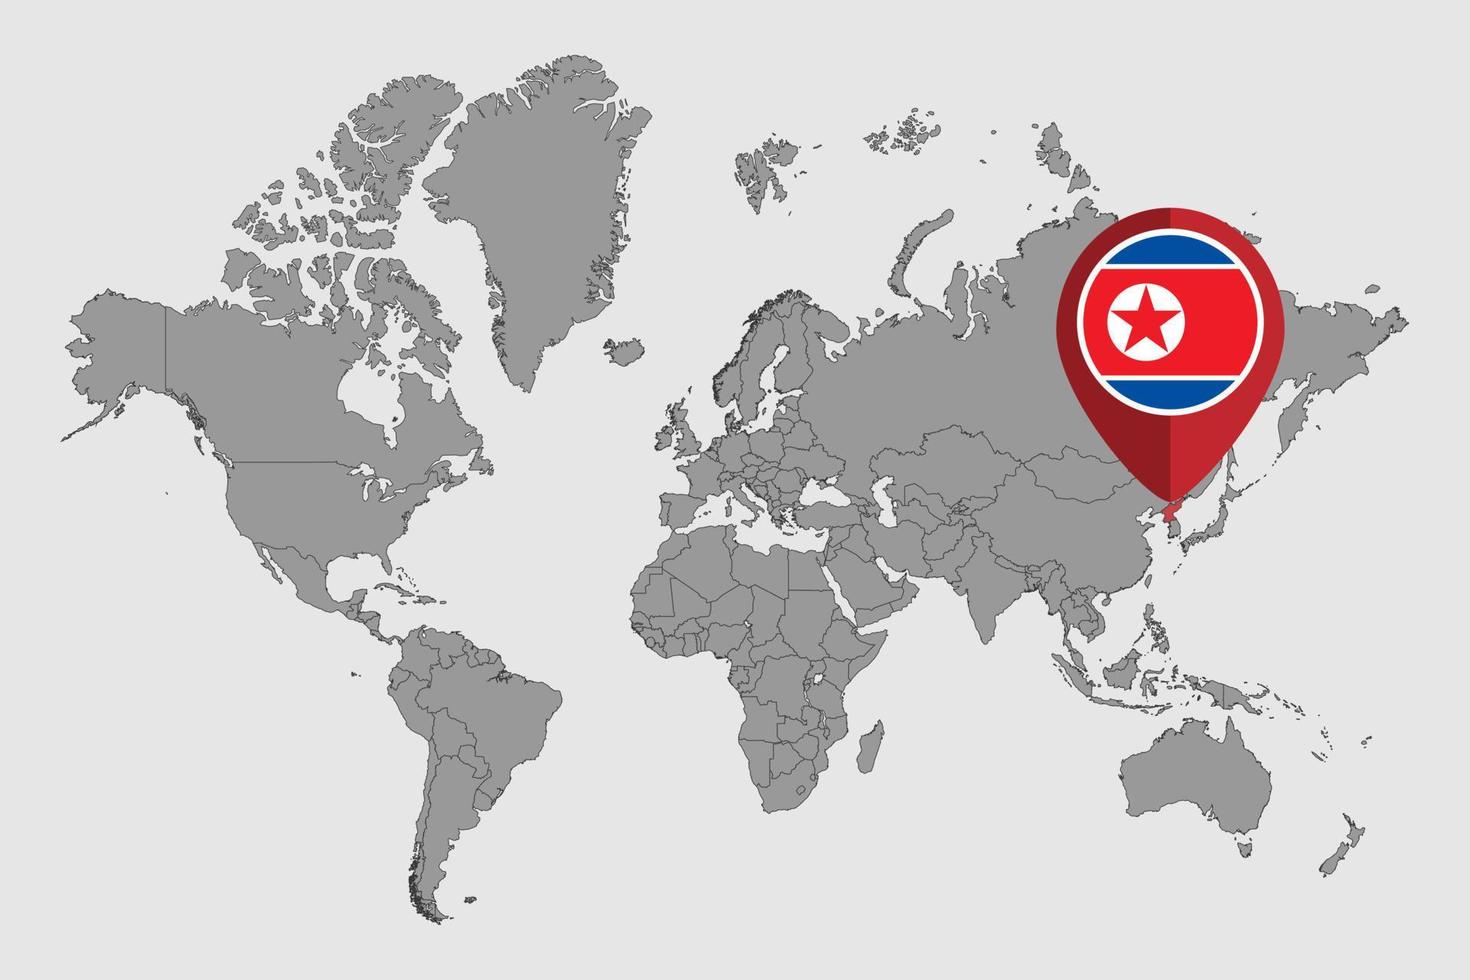 Pin map with North Korea flag on world map. Vector illustration.